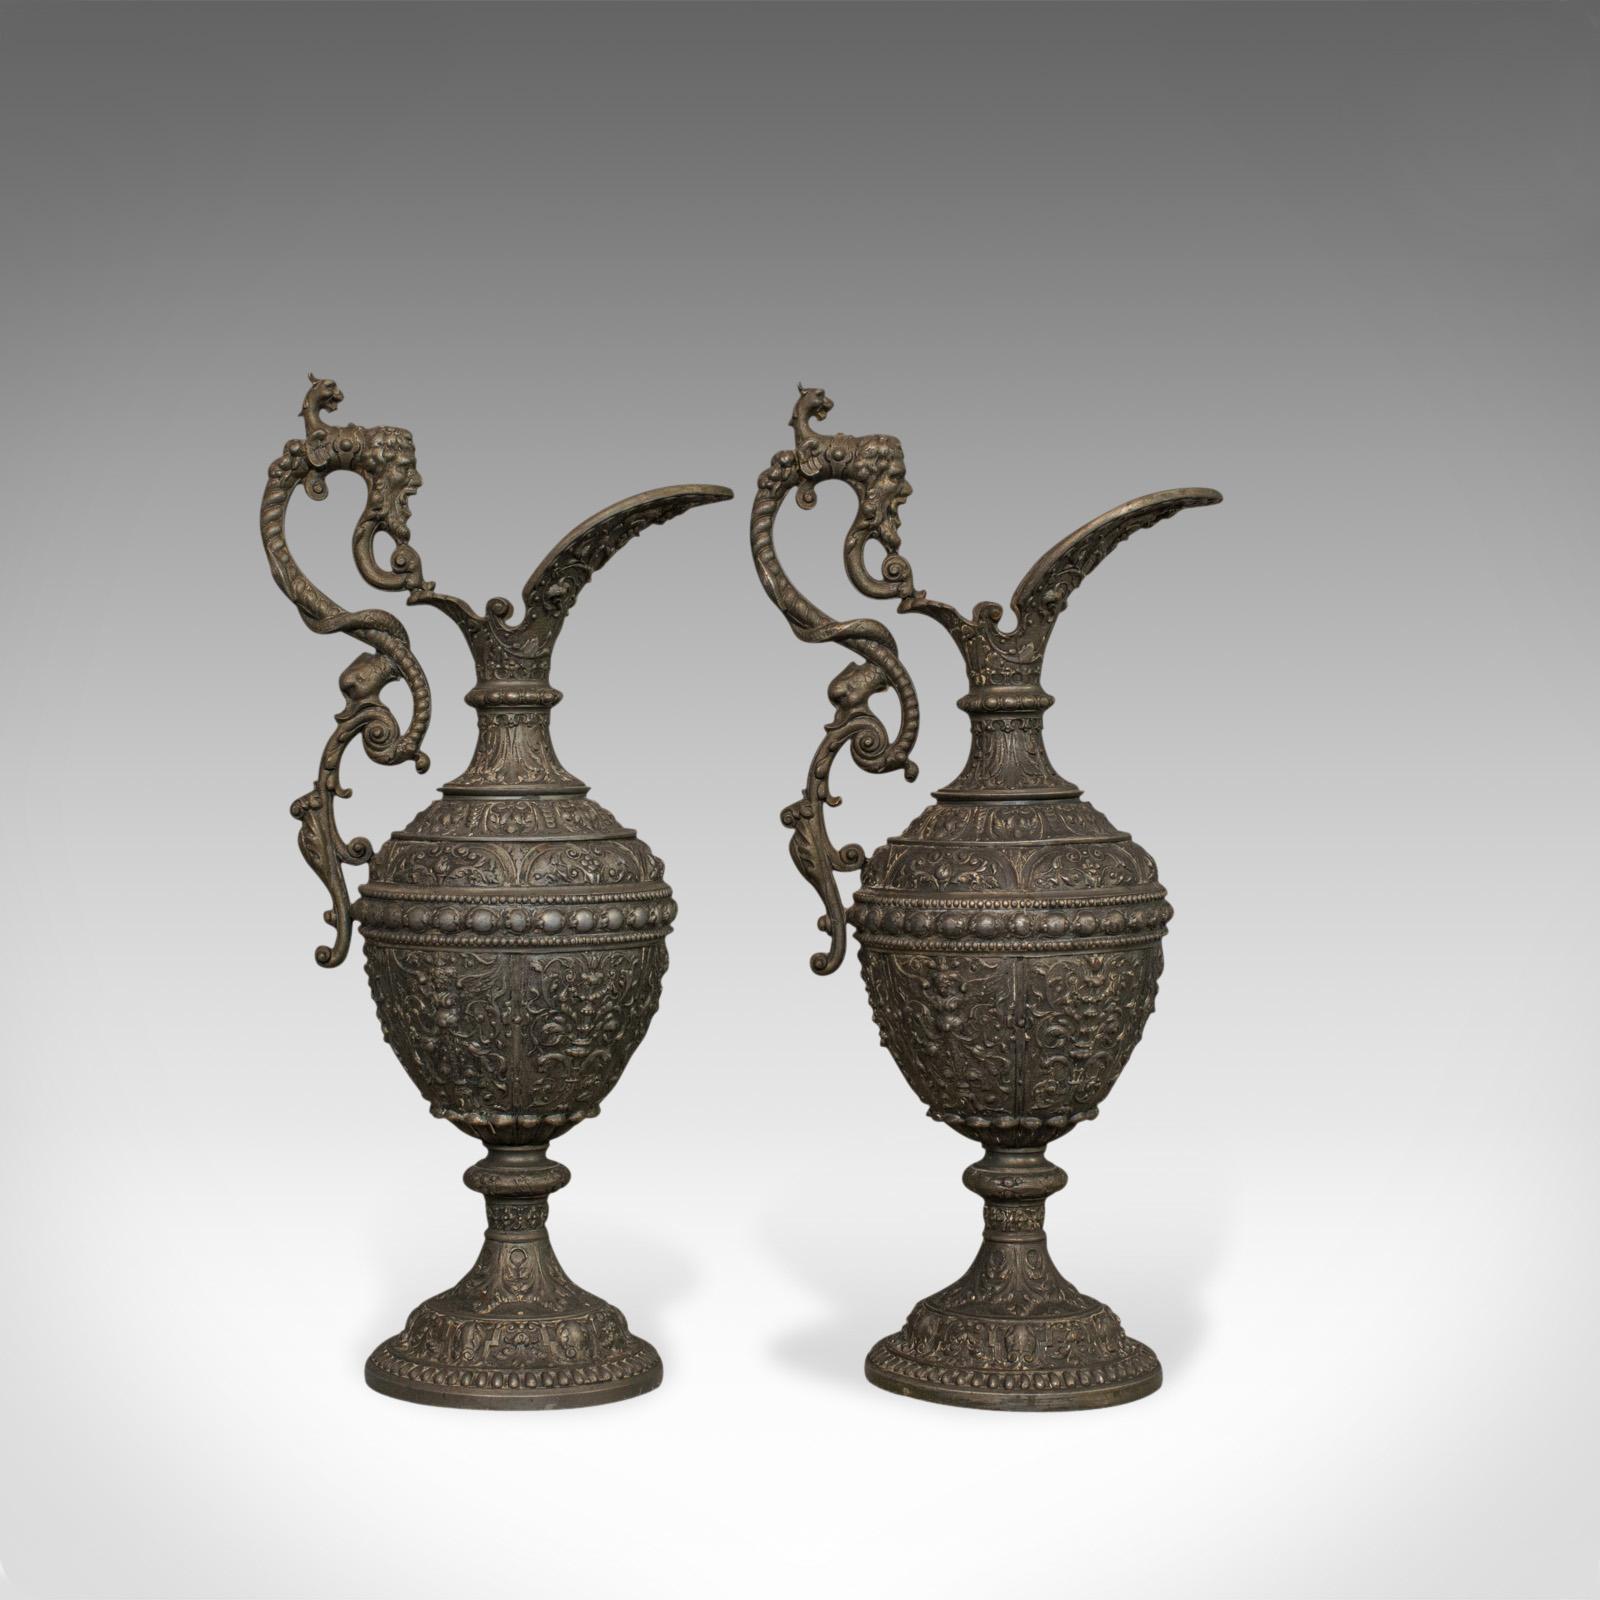 This is a pair of antique ewers in classical taste. Two French, decorative bronze spelter water jugs or wine pitchers and dating to the late 19th century, circa 1890.

Of impressive, highly decorated classical taste - perfect for Fine